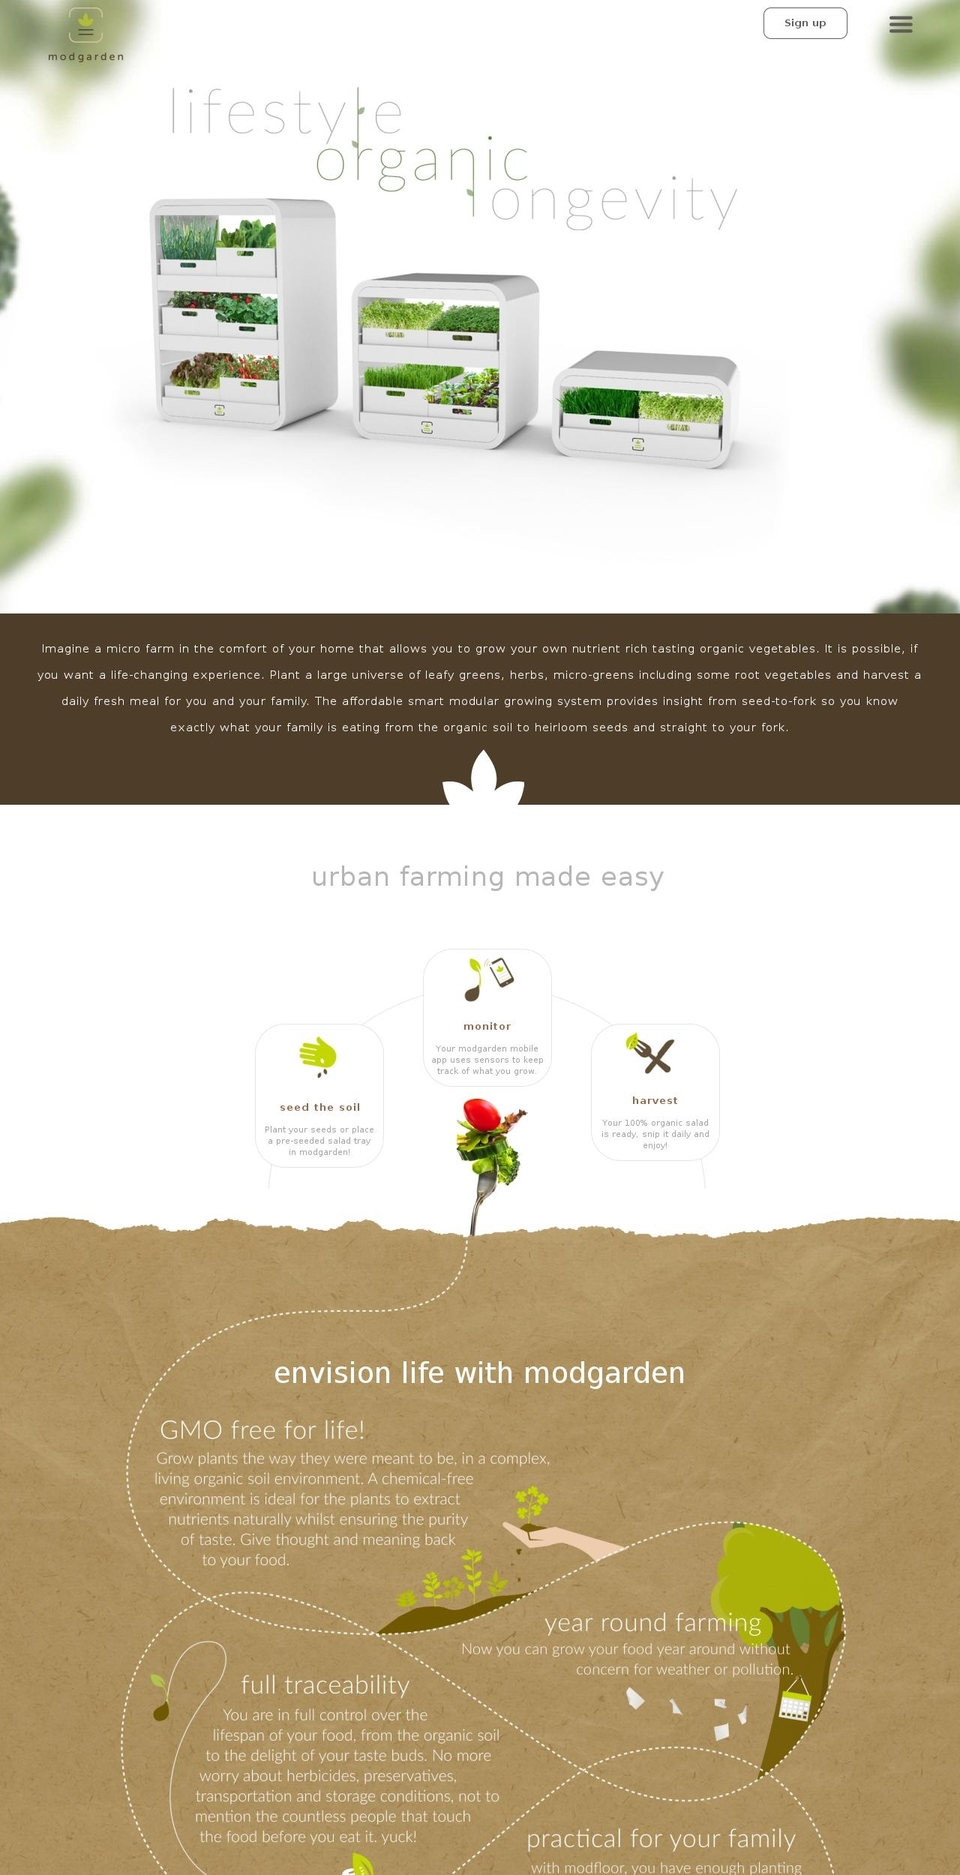 VertexDimension Shopify theme site example indoorgrove.com